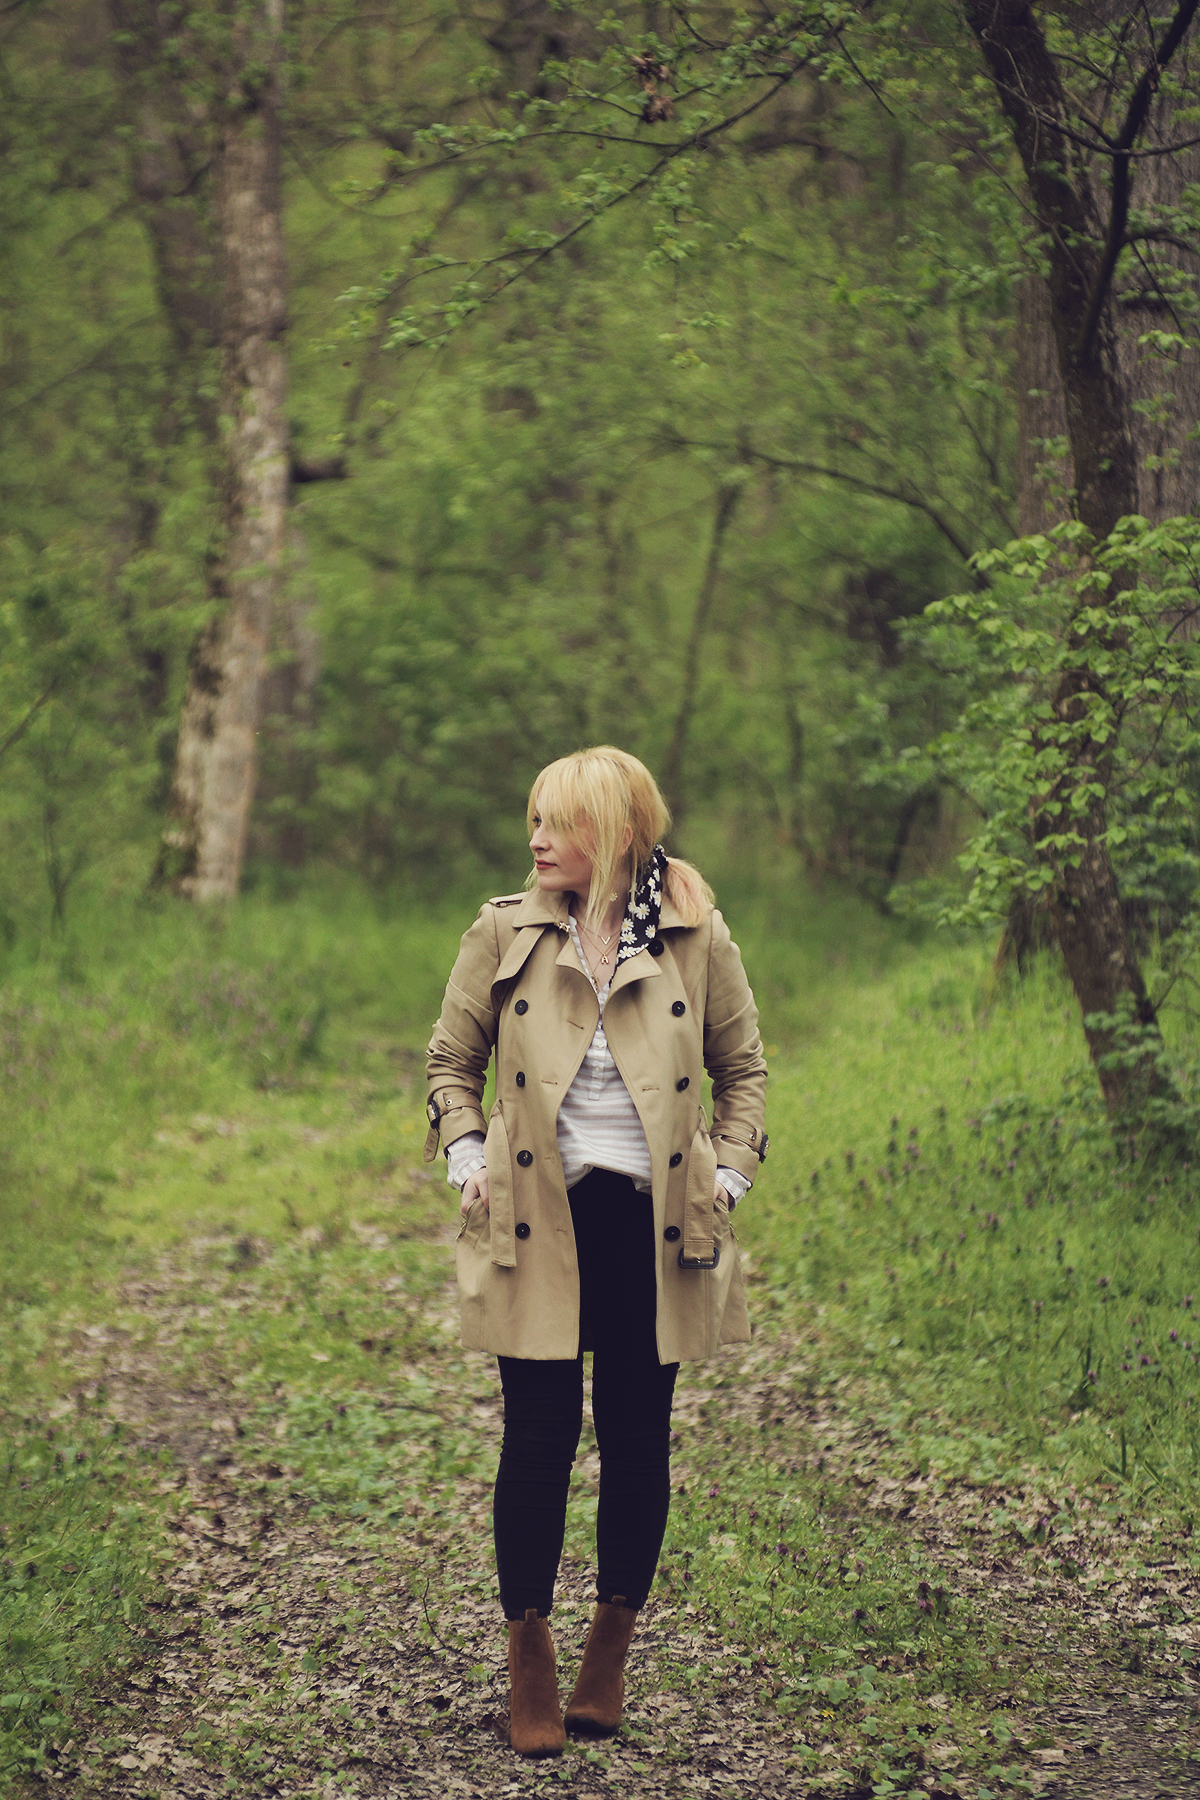 trench coat, jeans, suede boots, daisy print hair scarf, striped shirt, spring, spring look, into the woods